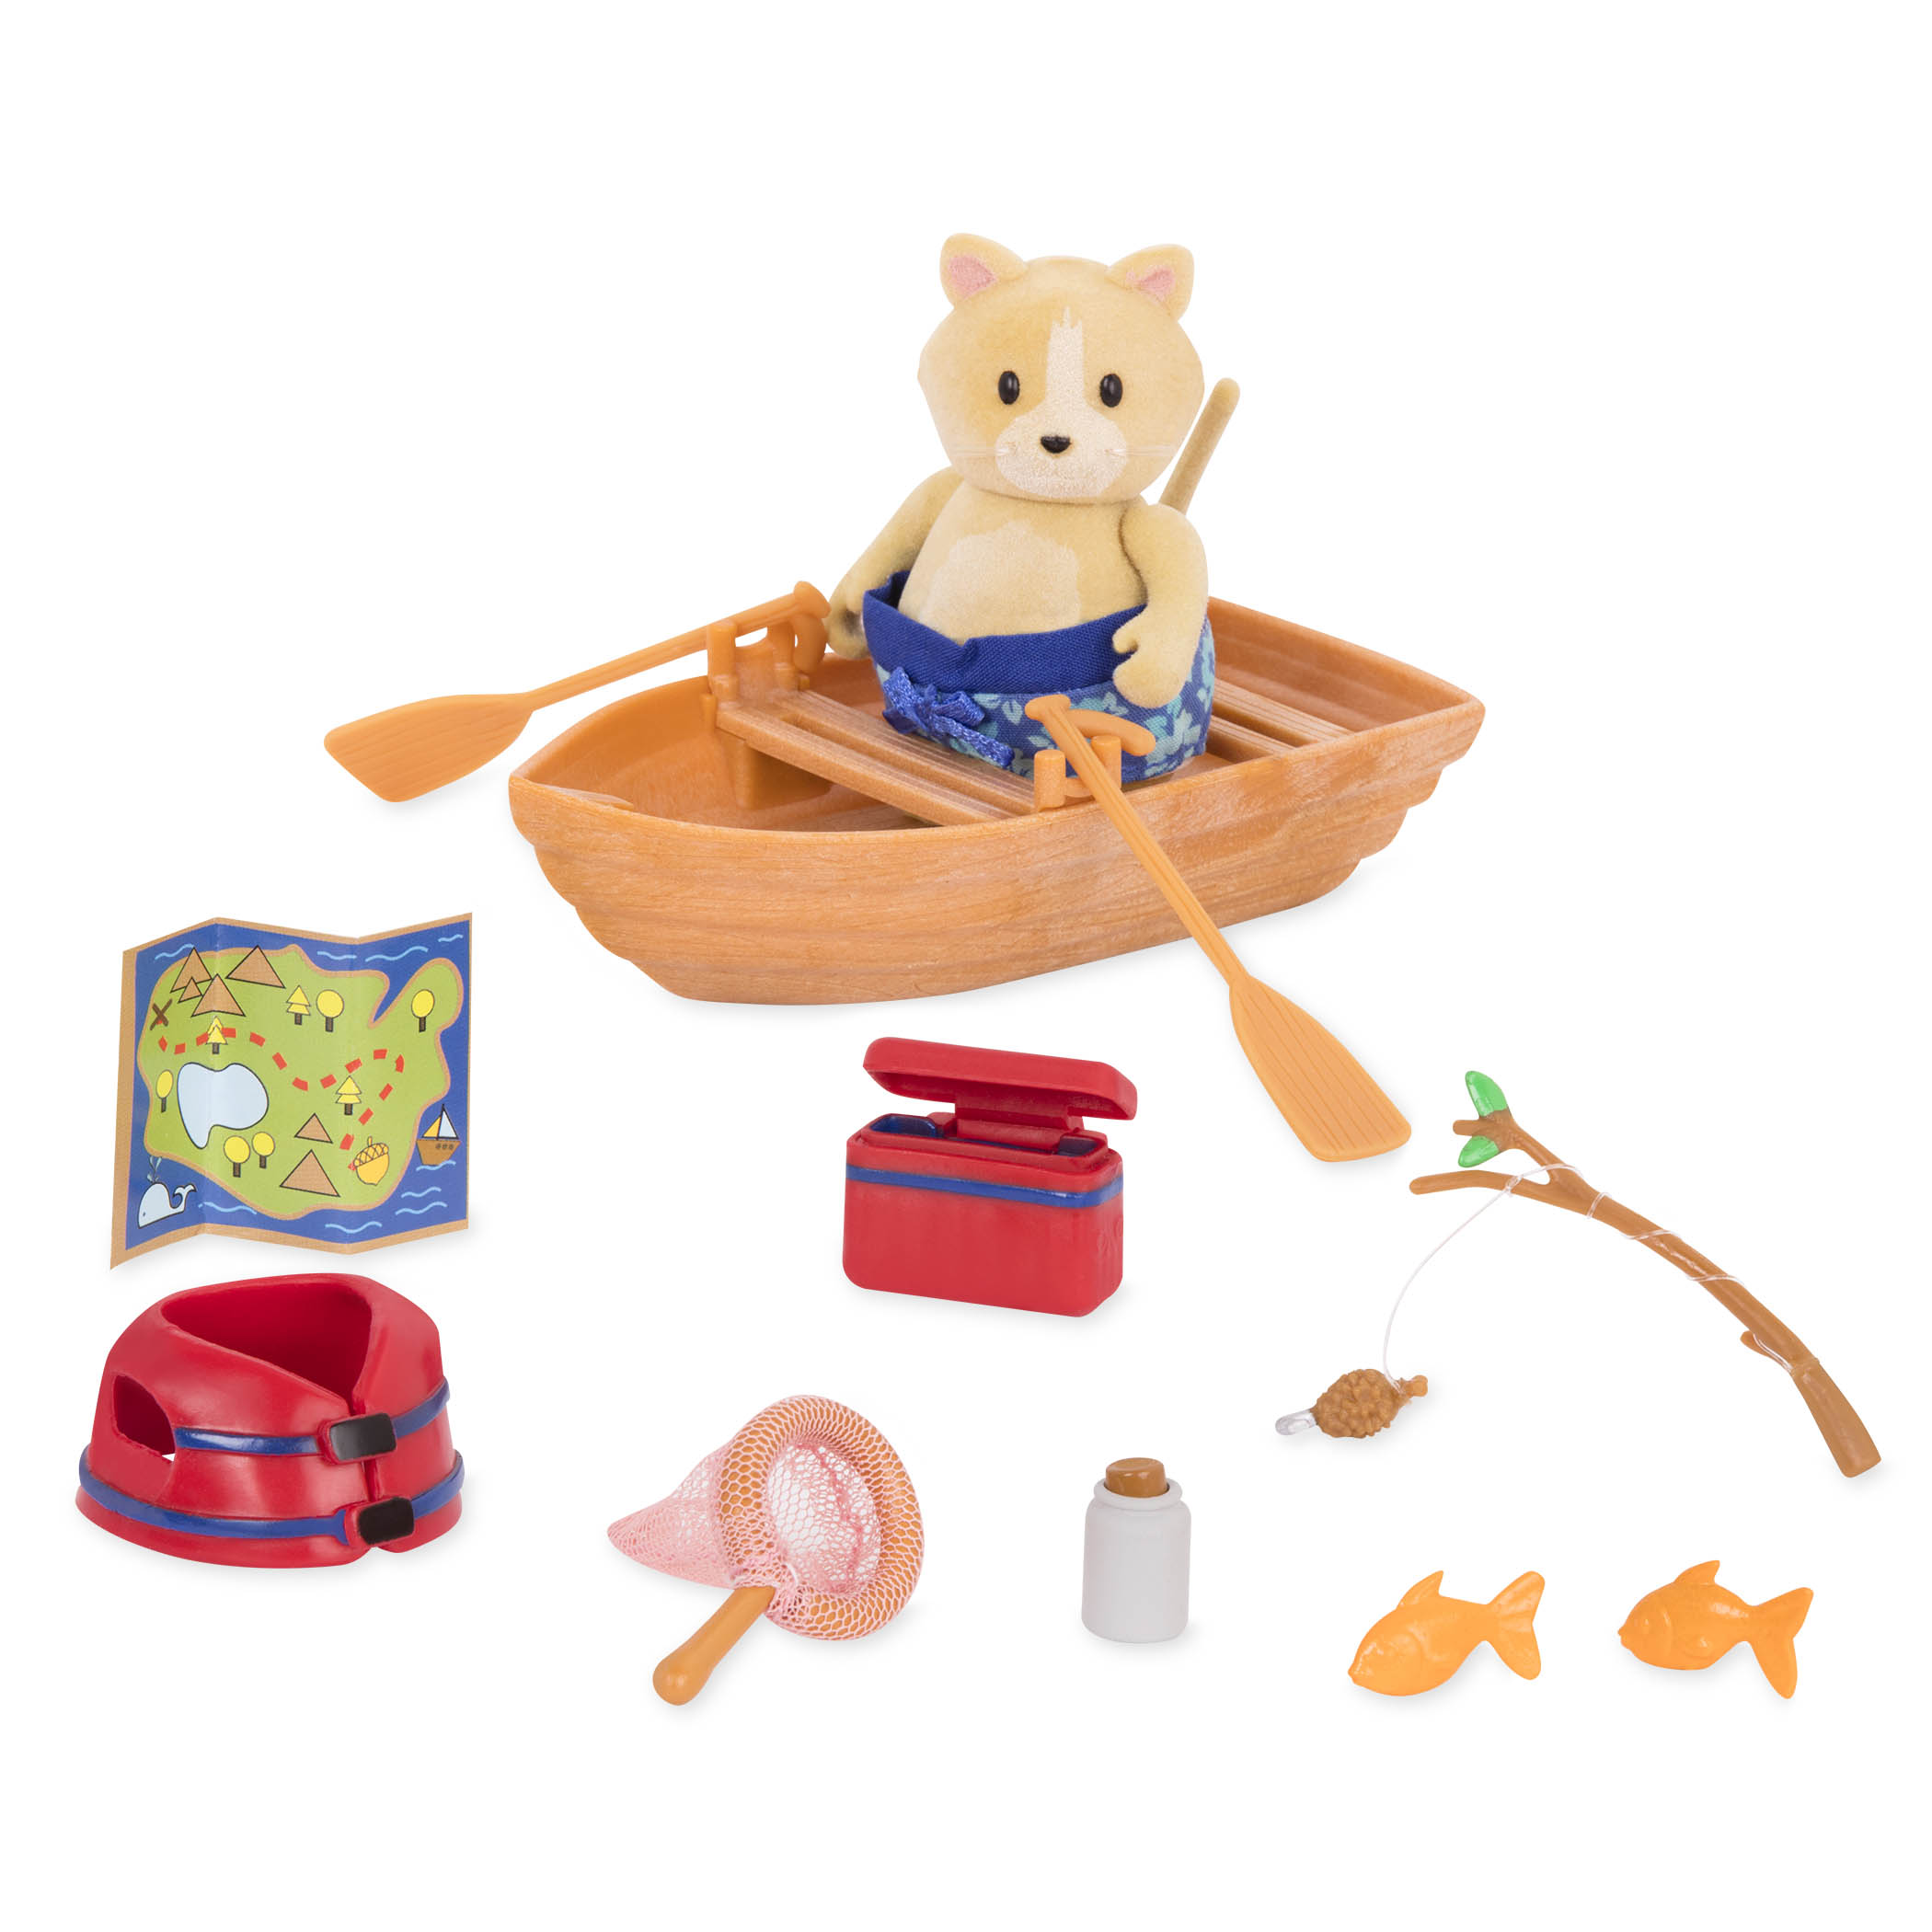 Boating Playset, Toy Boat and Small Cat Playset